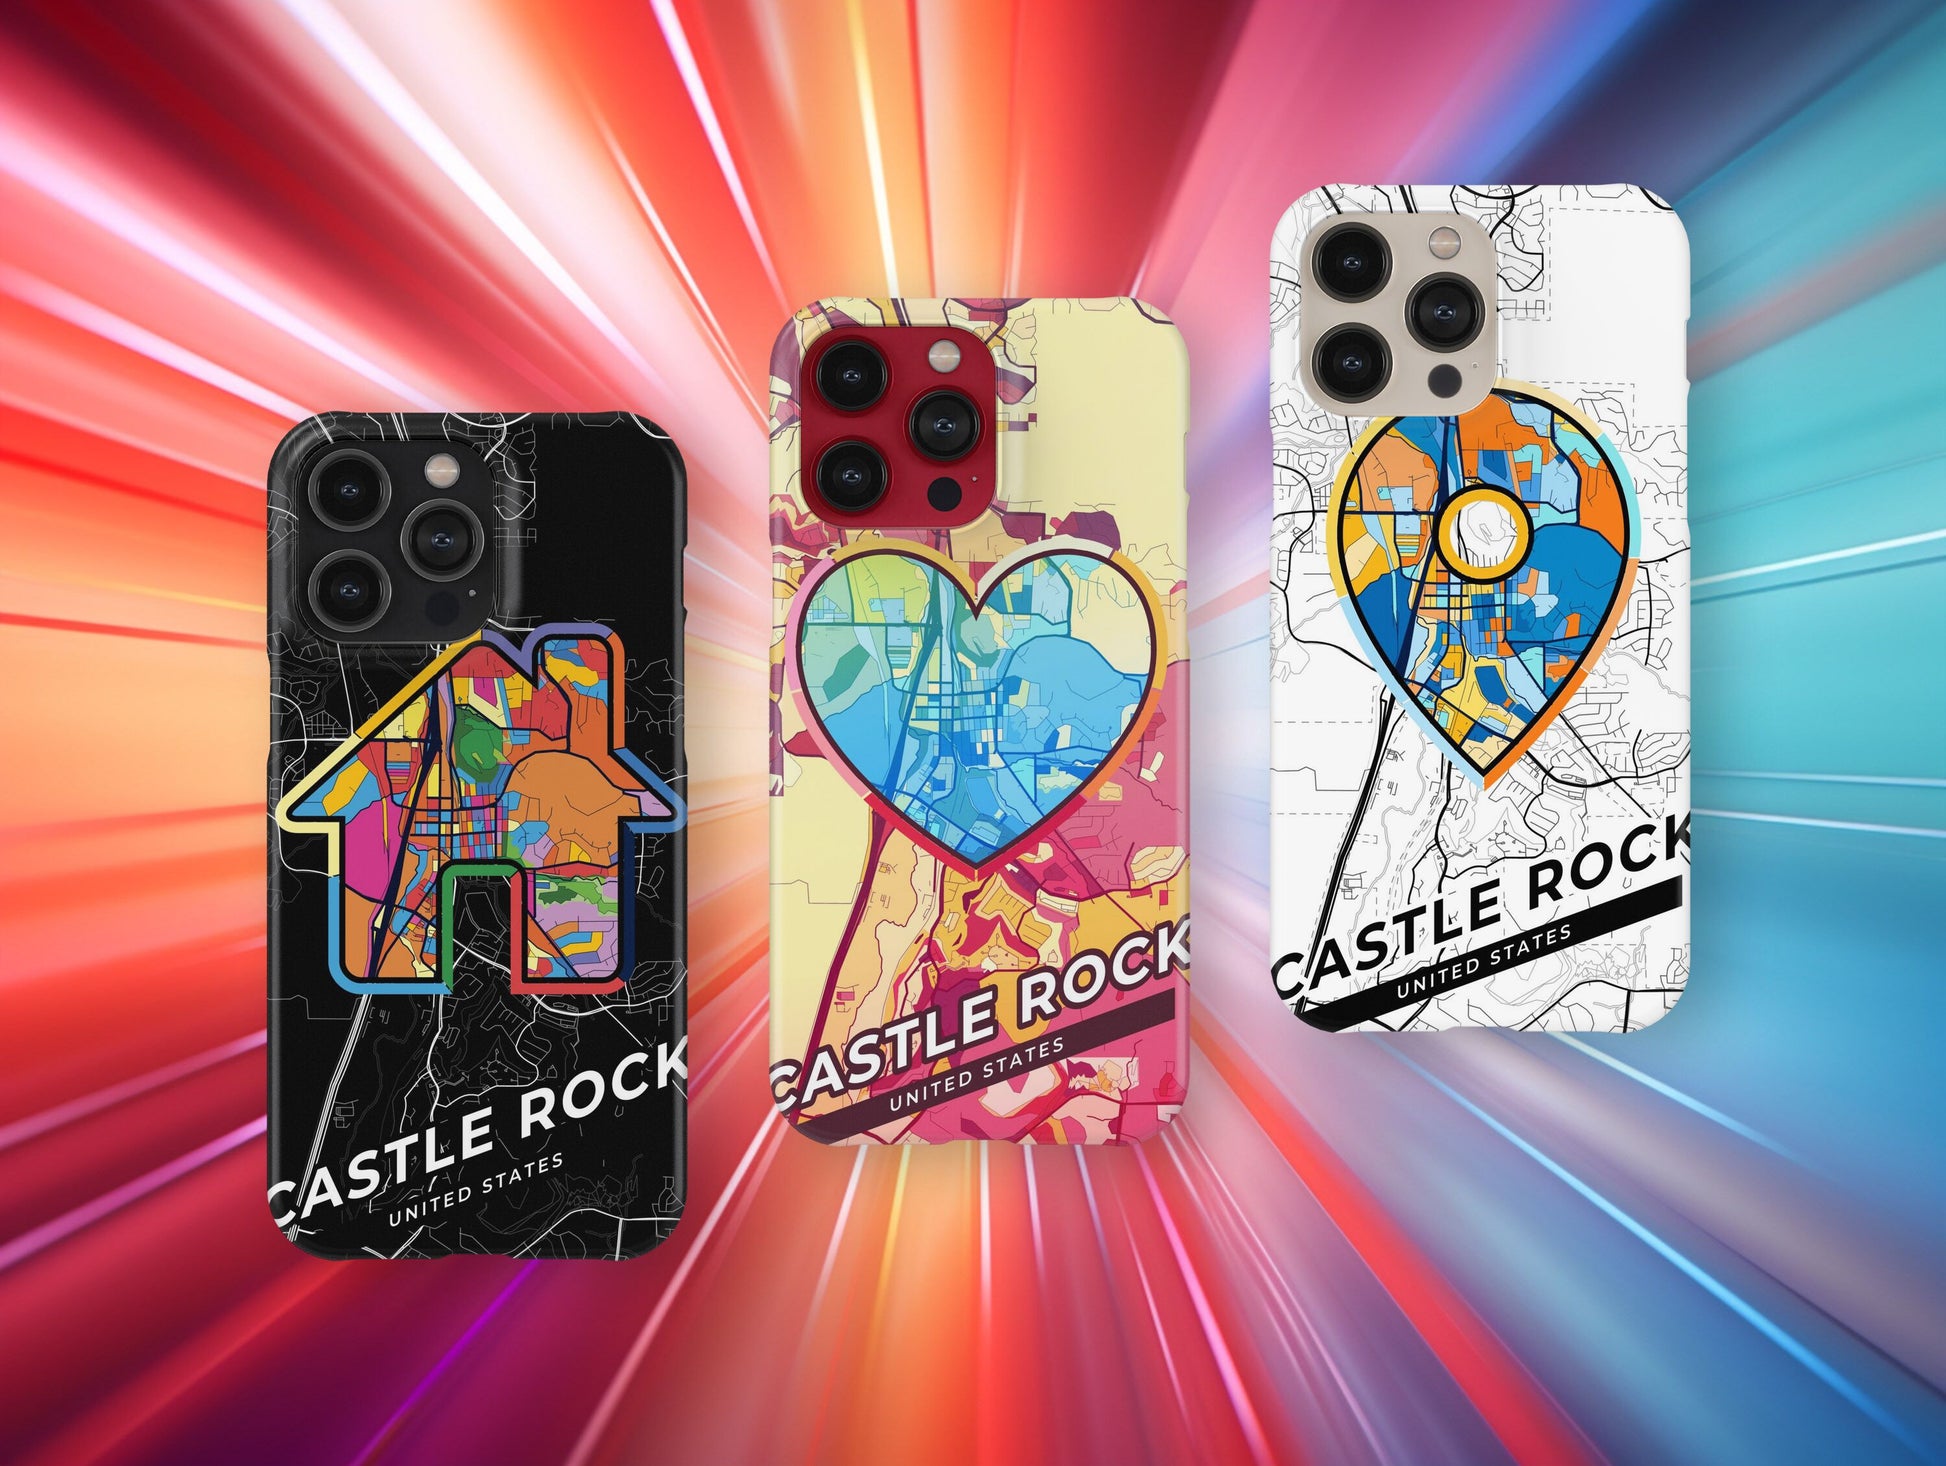 Castle Rock Colorado slim phone case with colorful icon. Birthday, wedding or housewarming gift. Couple match cases.